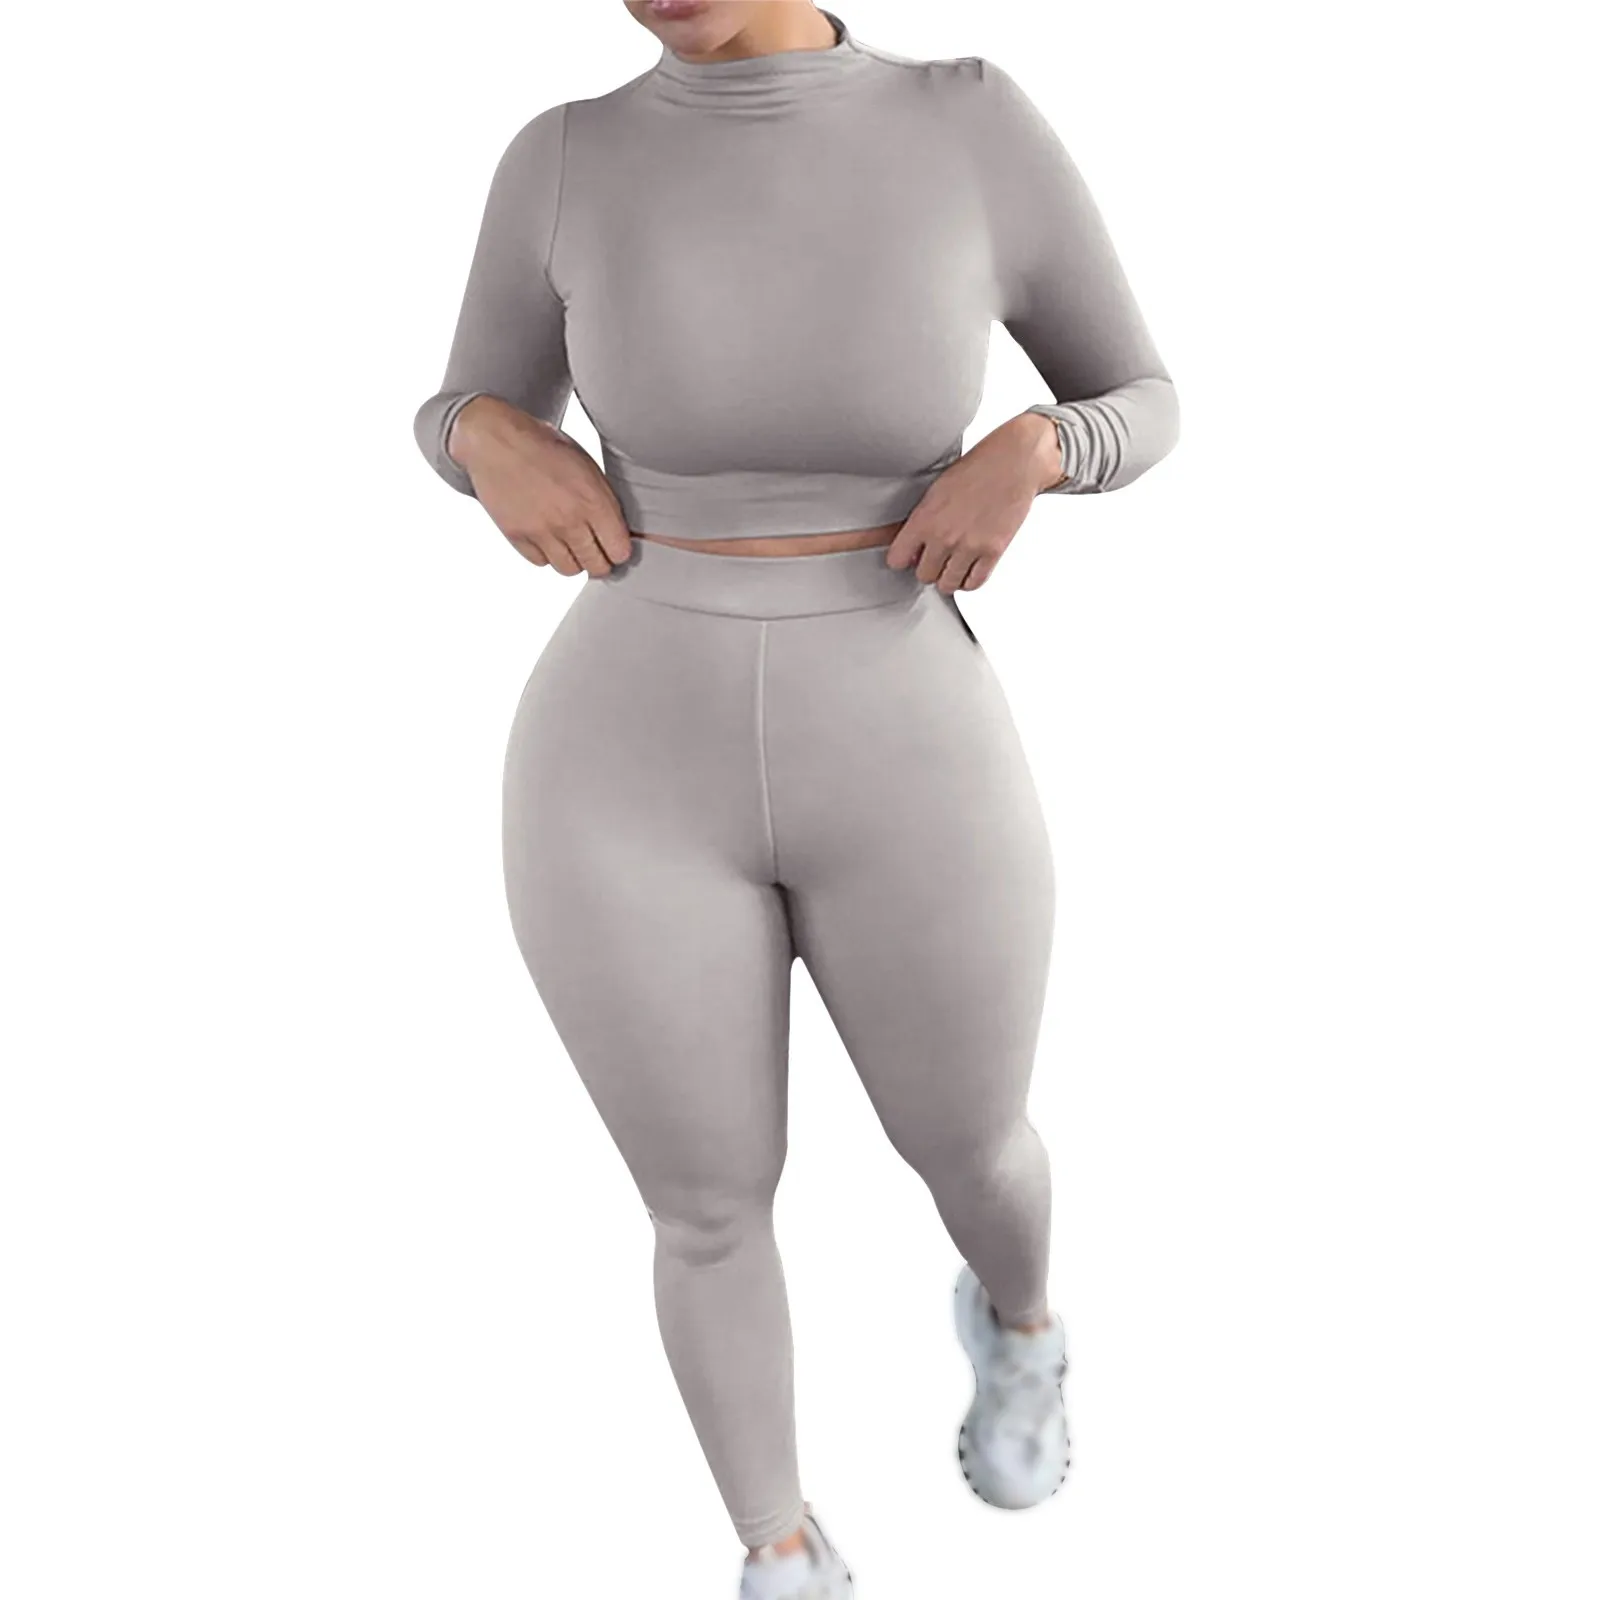 

Women's Two Piece Sets Spring Autumn Tracksuits High Waist Stretchy Sportswear Hot Crop Tops and Leggings Matching Outfits